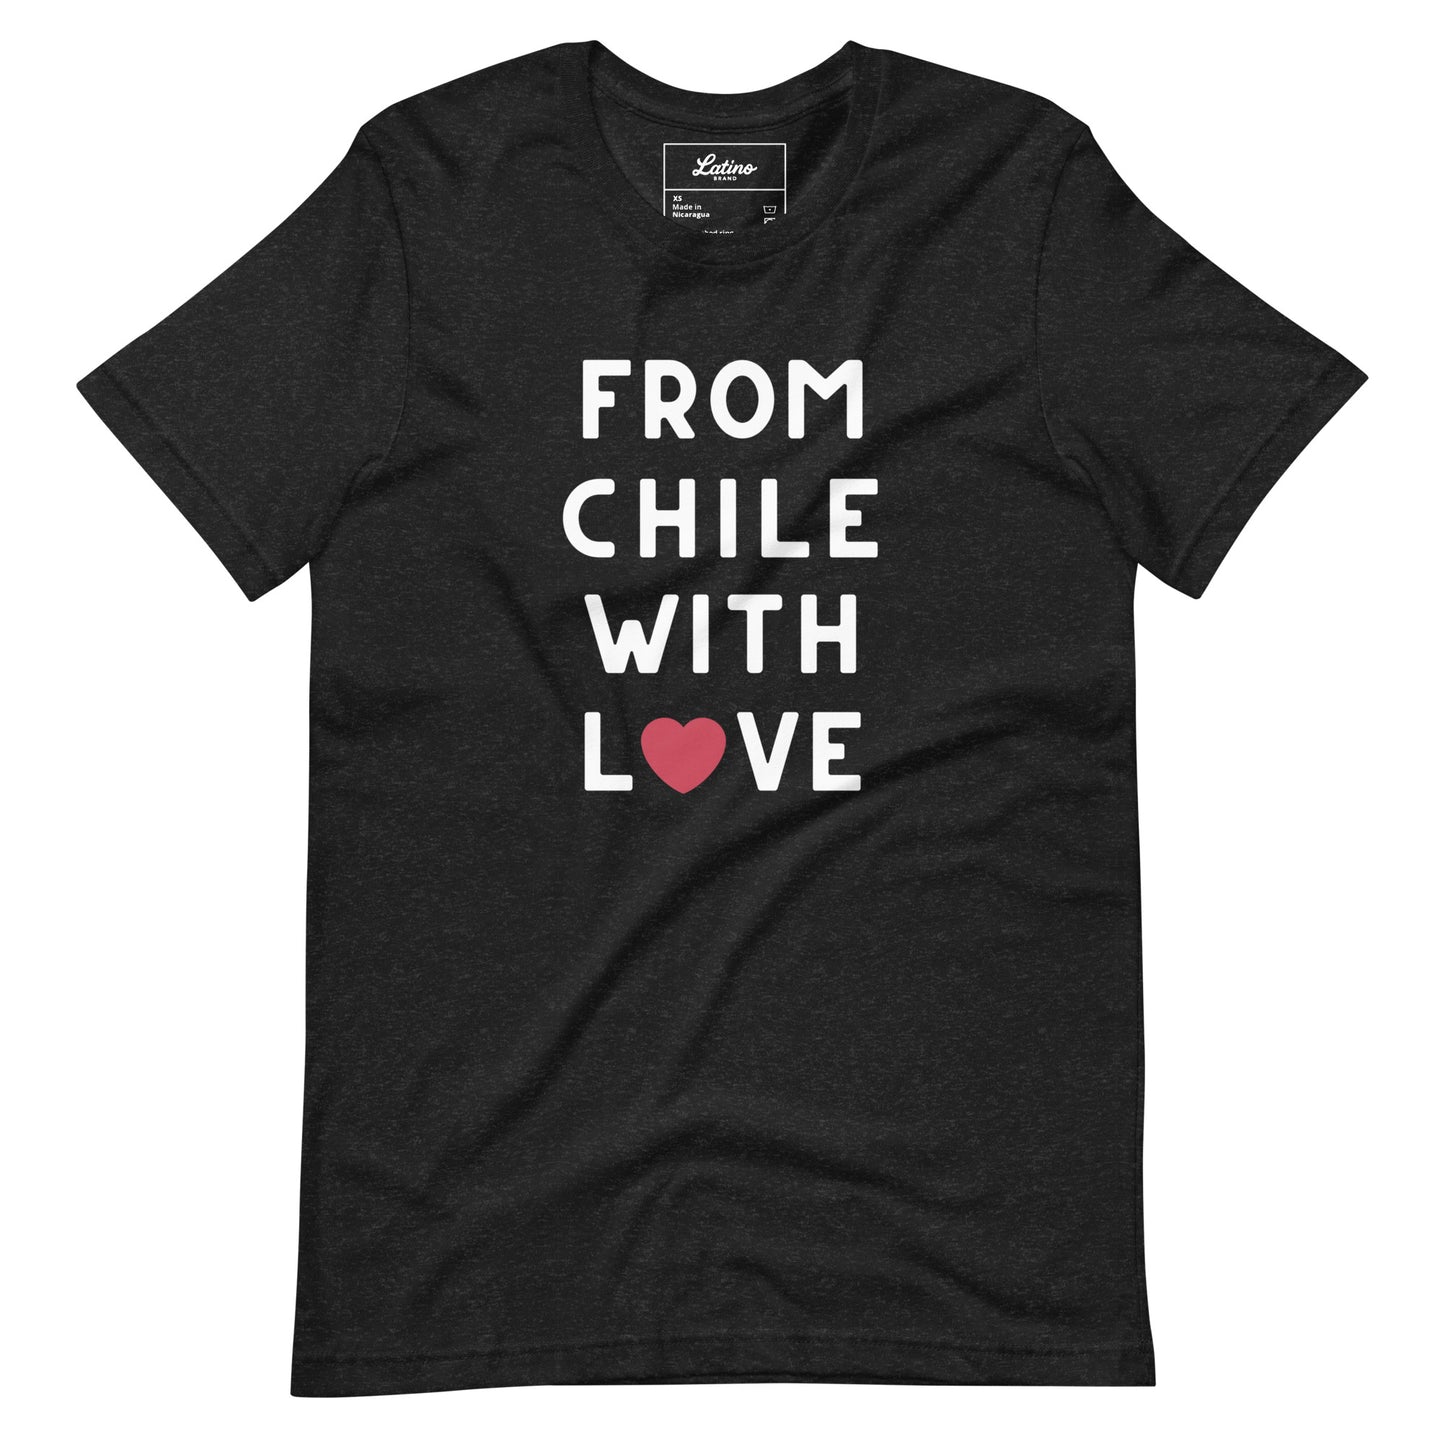 🇨🇱 From Chile With Love